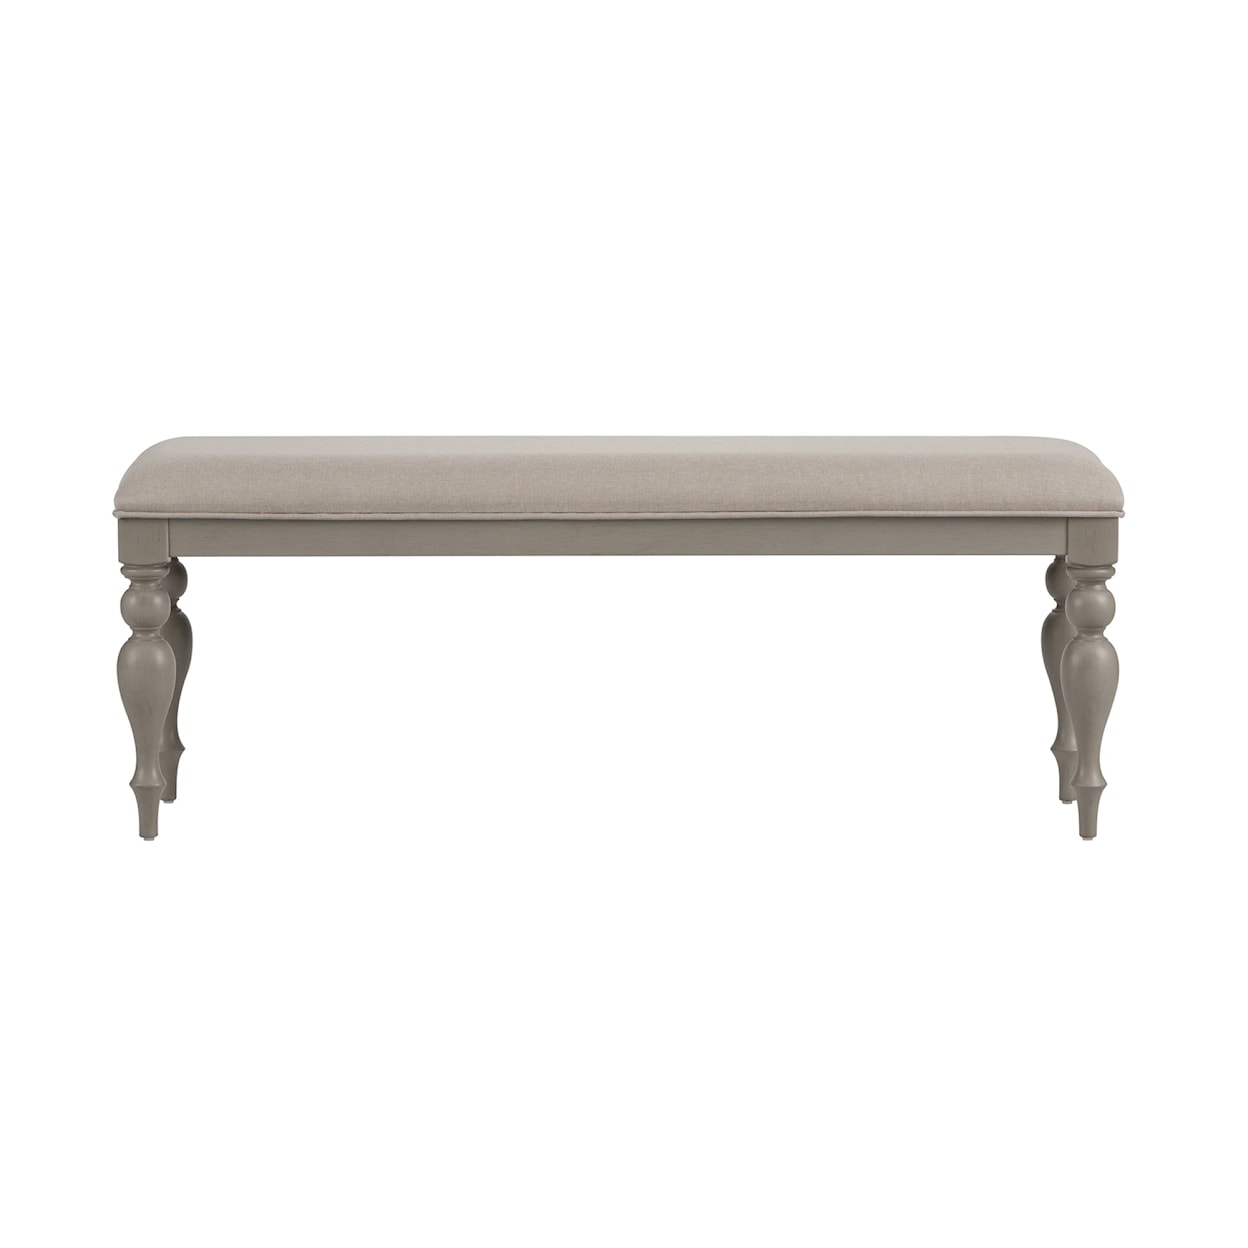 Libby Summer House II Upholstered Dining Bench